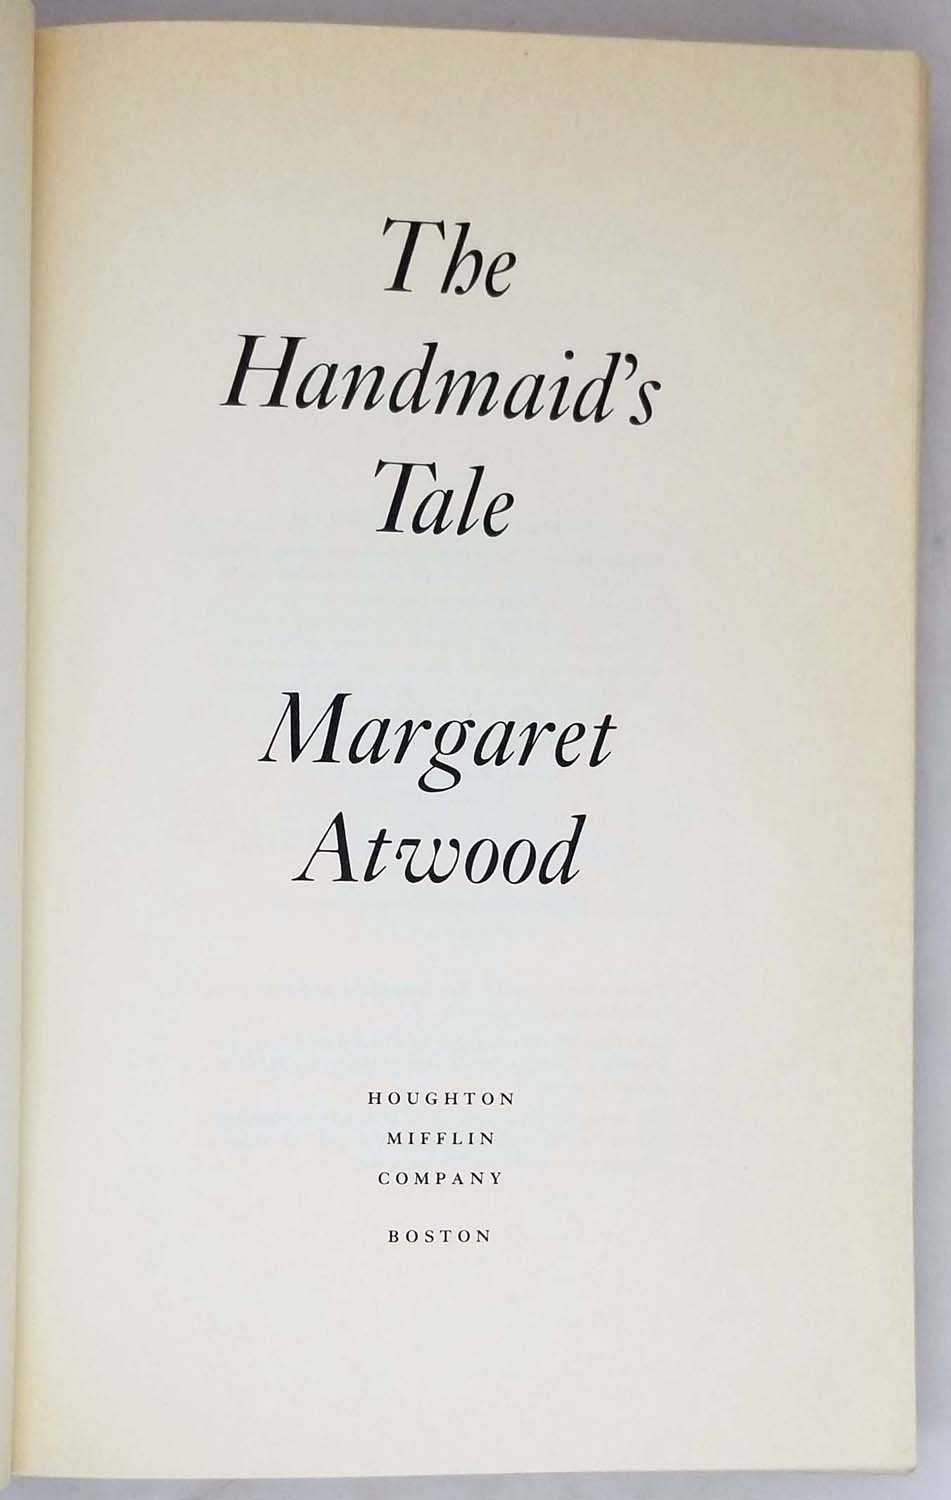 The Handmaid's Tales - Margaret Atwood 1986 | 2nd Printing